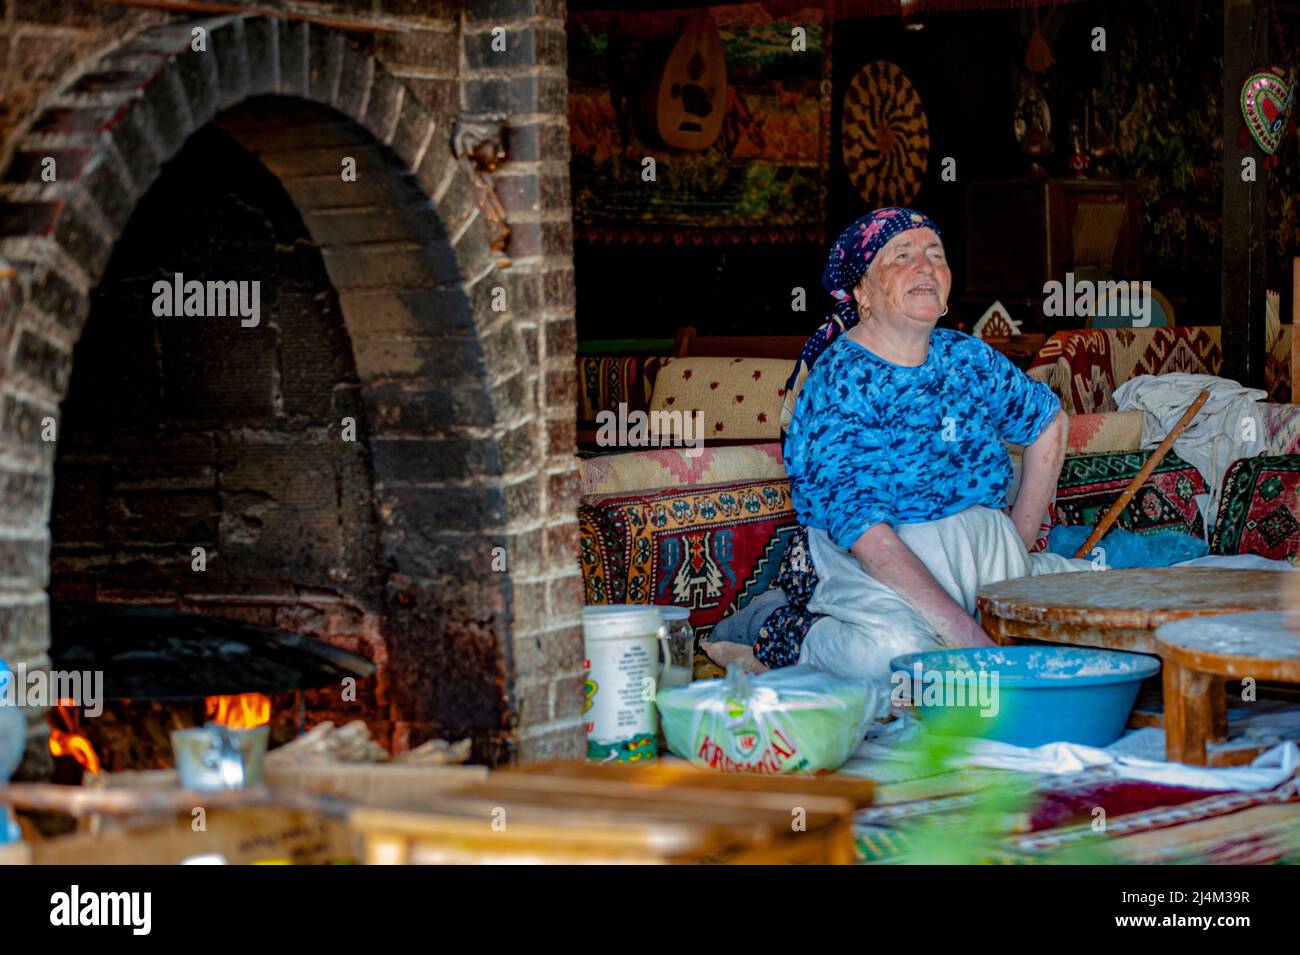 Older Turkish woman sits while at work making food at an eatery in Ephesus, Turkey. Stock Photo